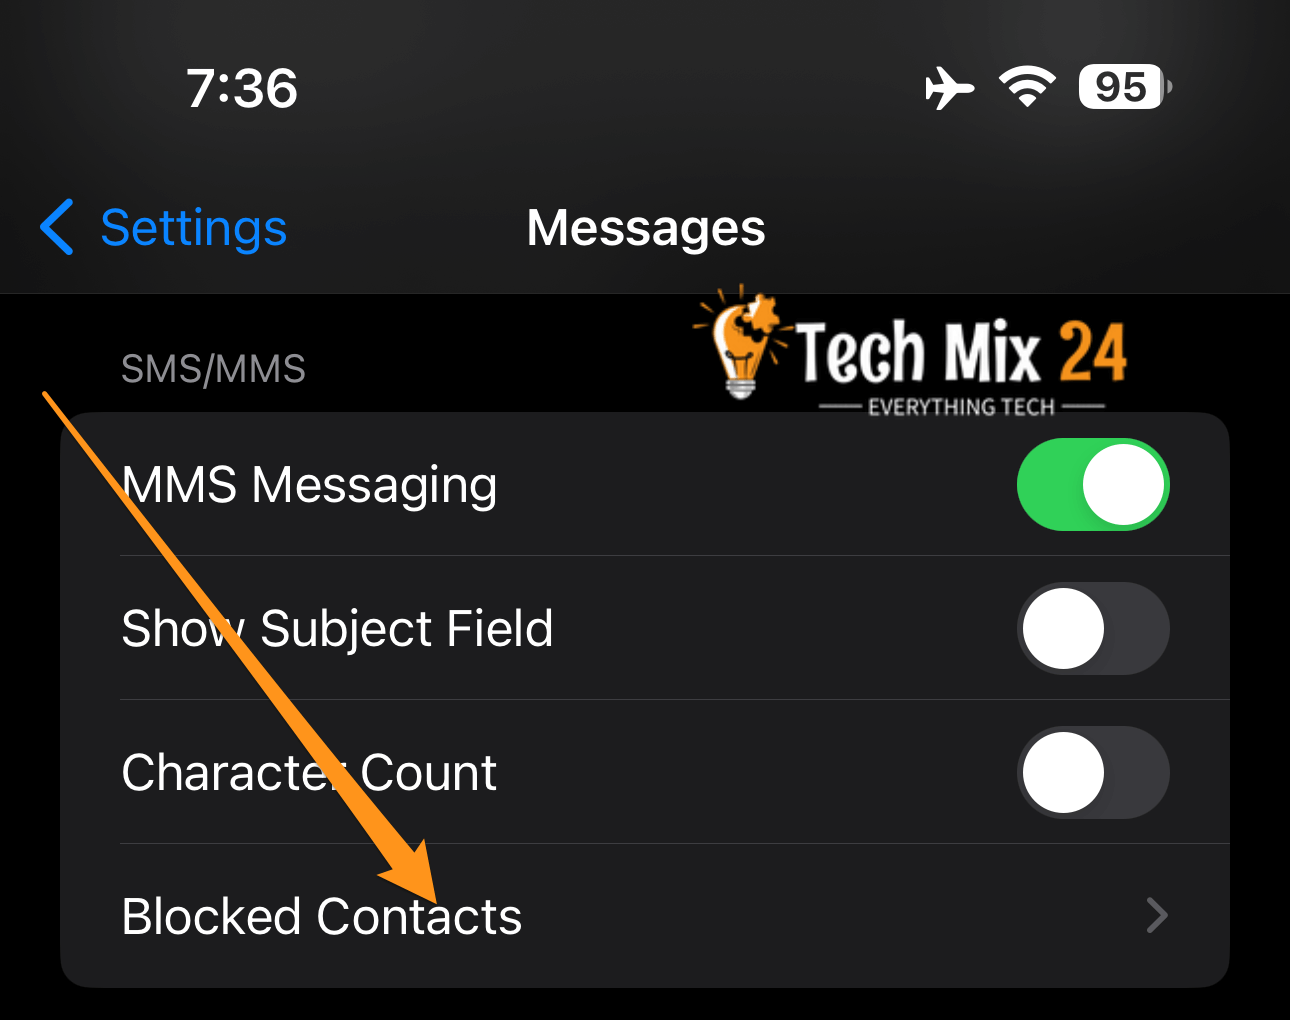 click on blocked contacts